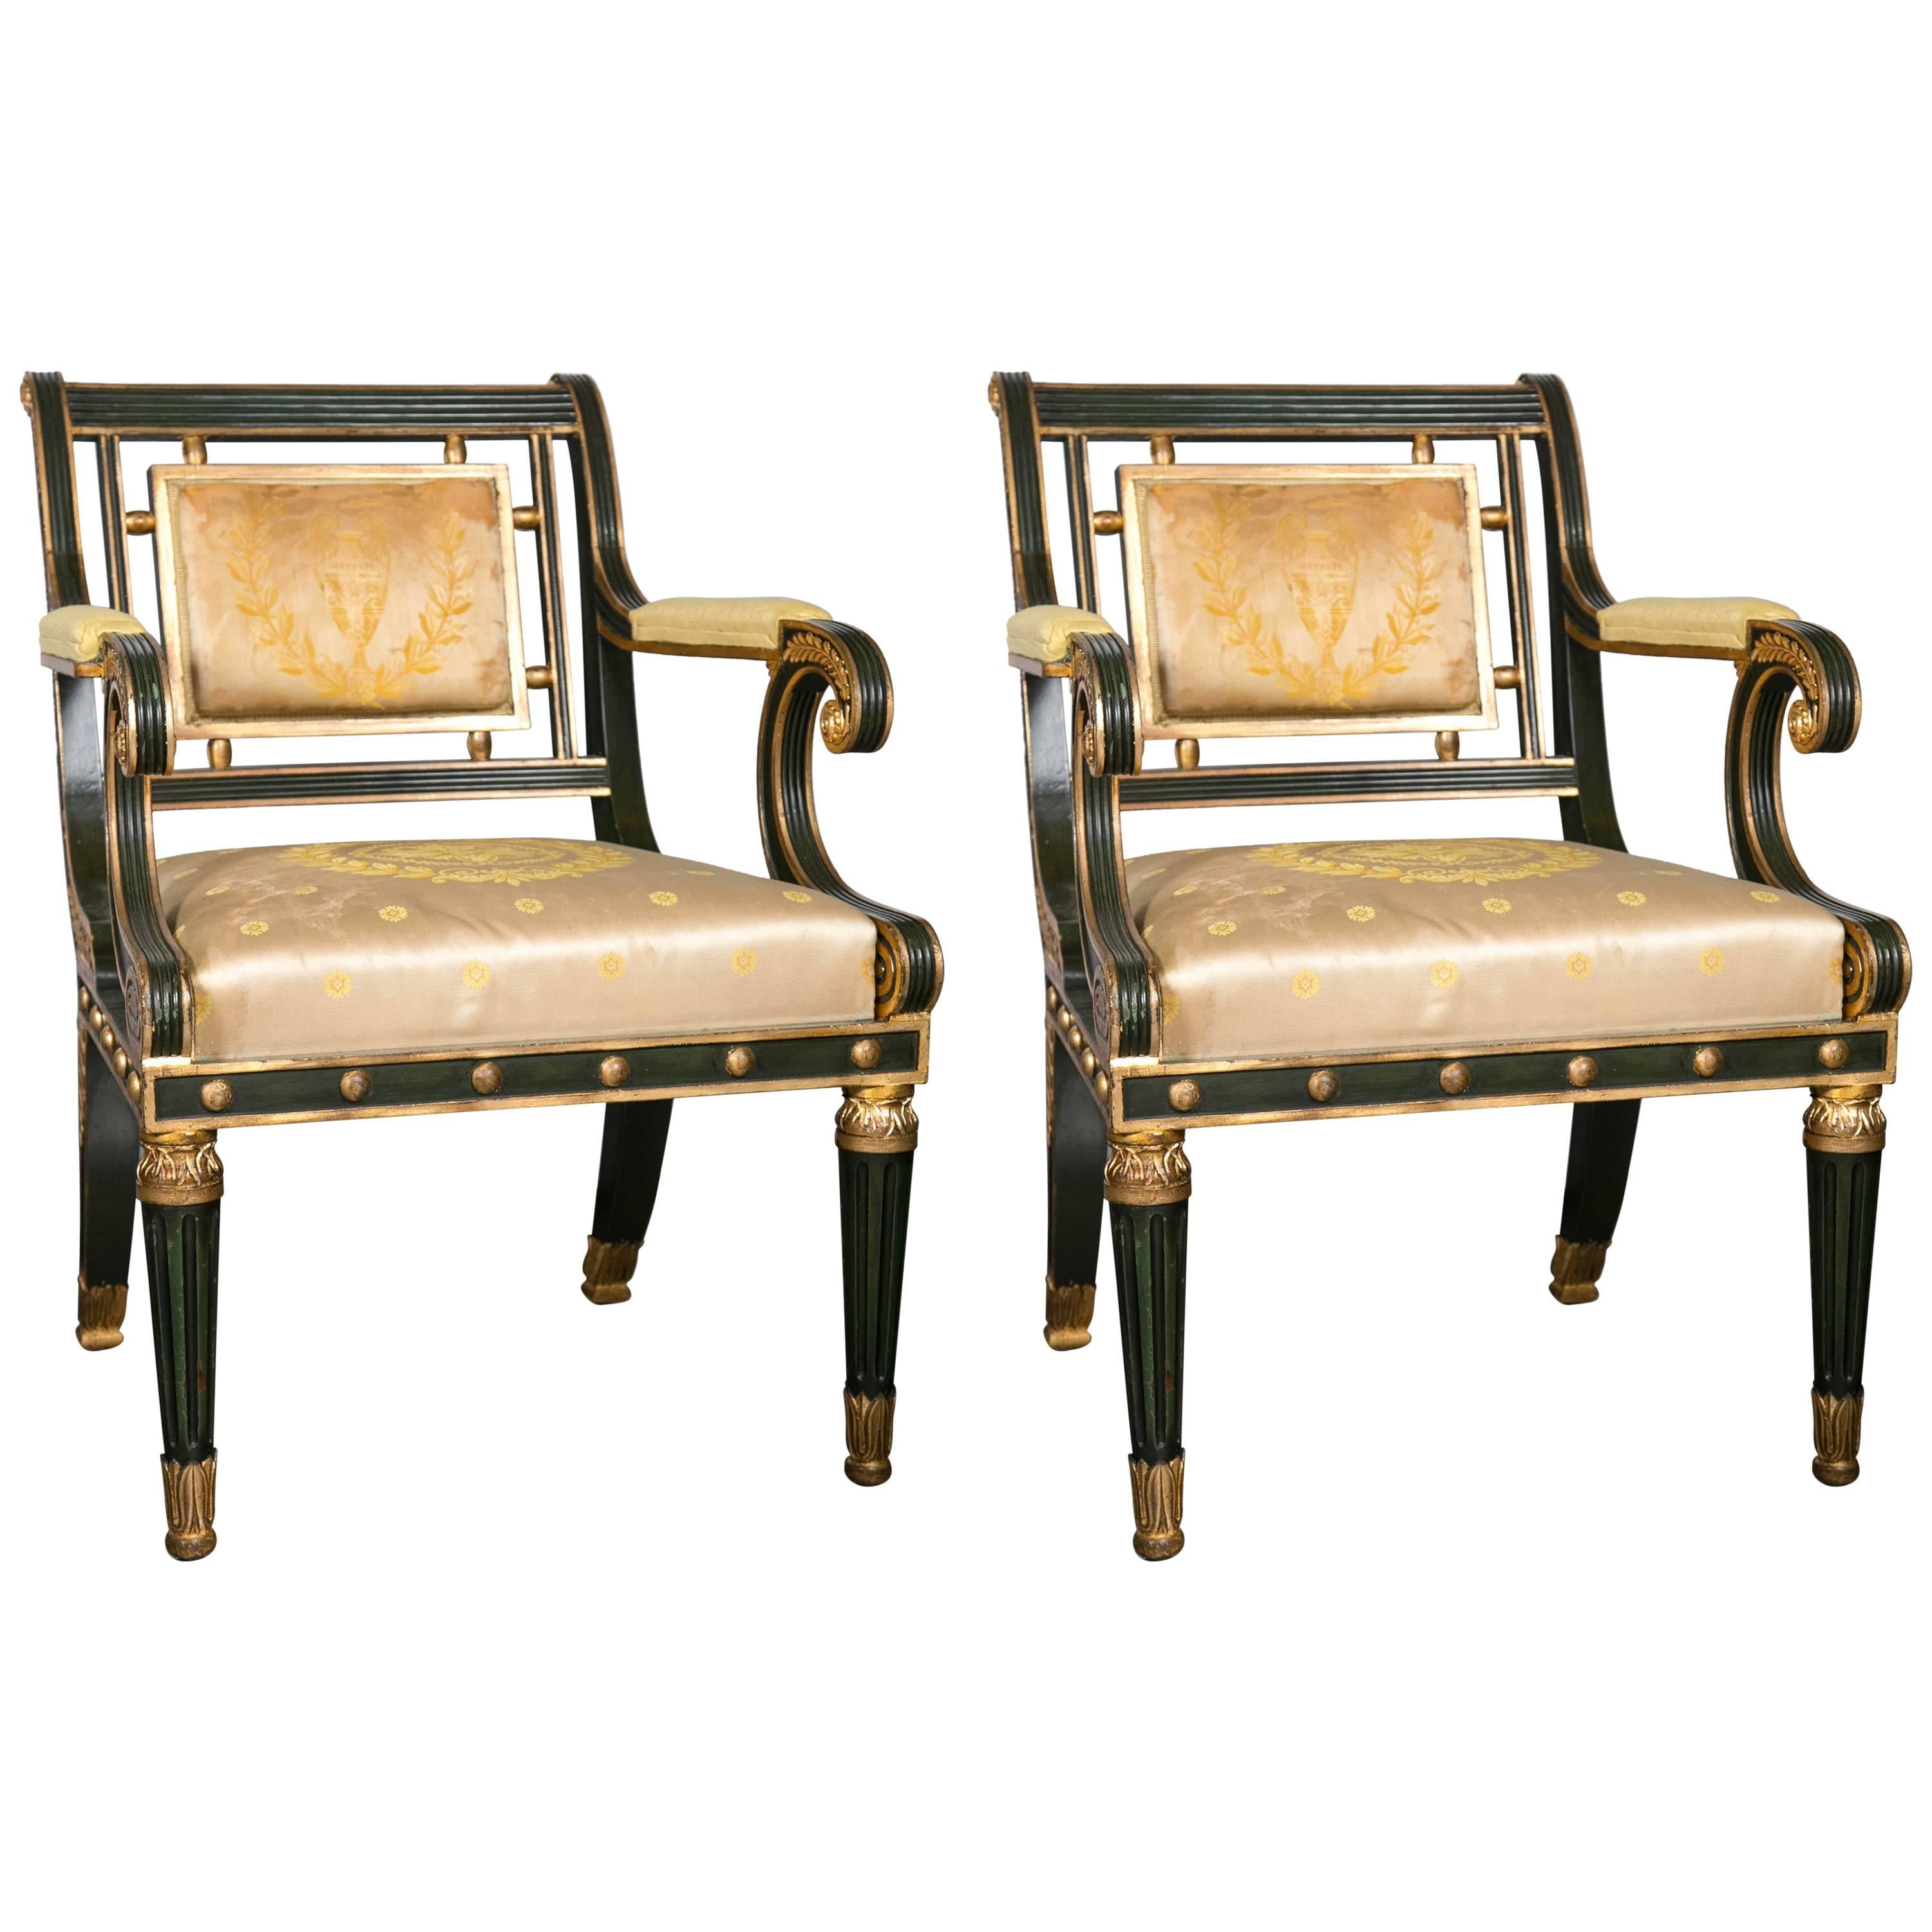 Pair of Fabulous Russian Neoclassical Style Chairs